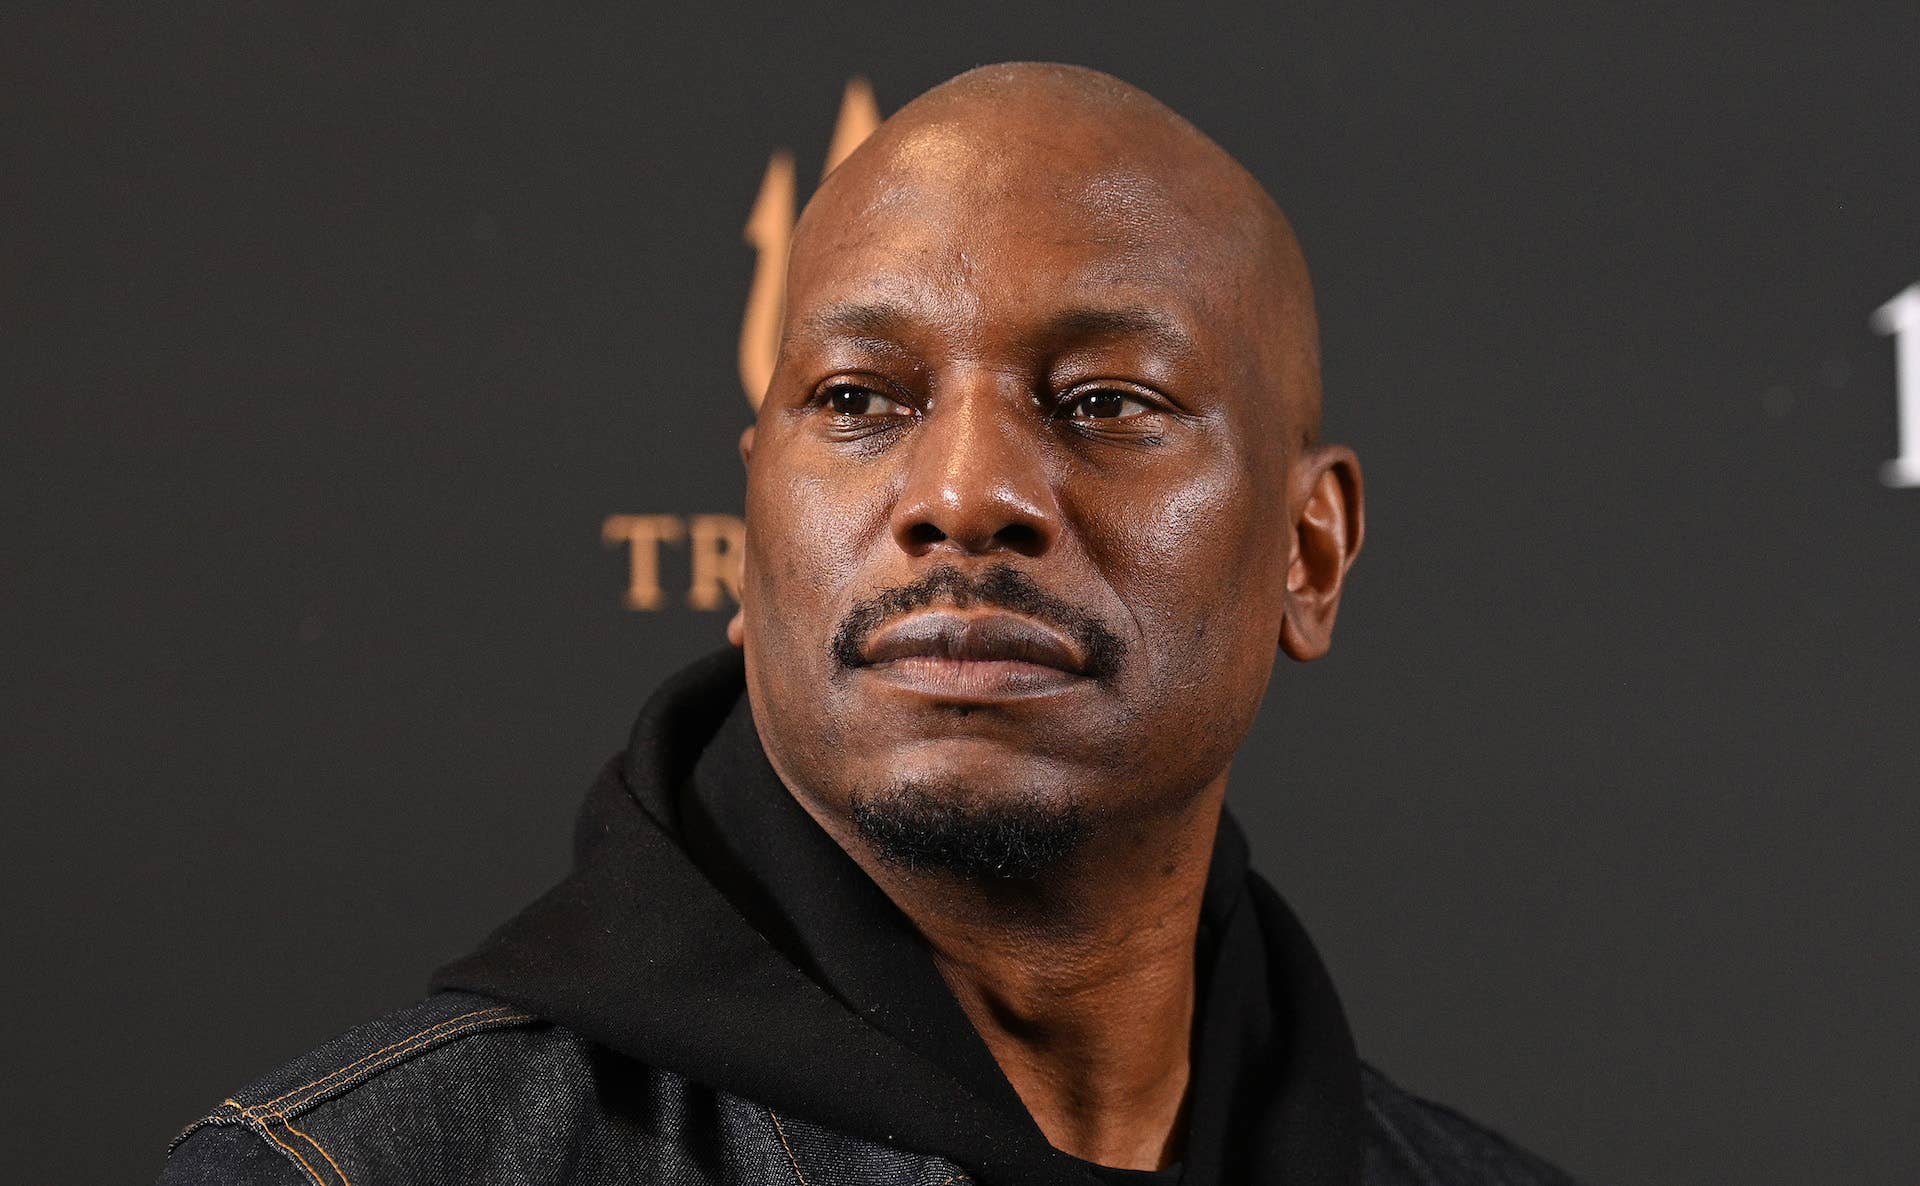 Tyrese attends premiere of '1992' in Hollywood